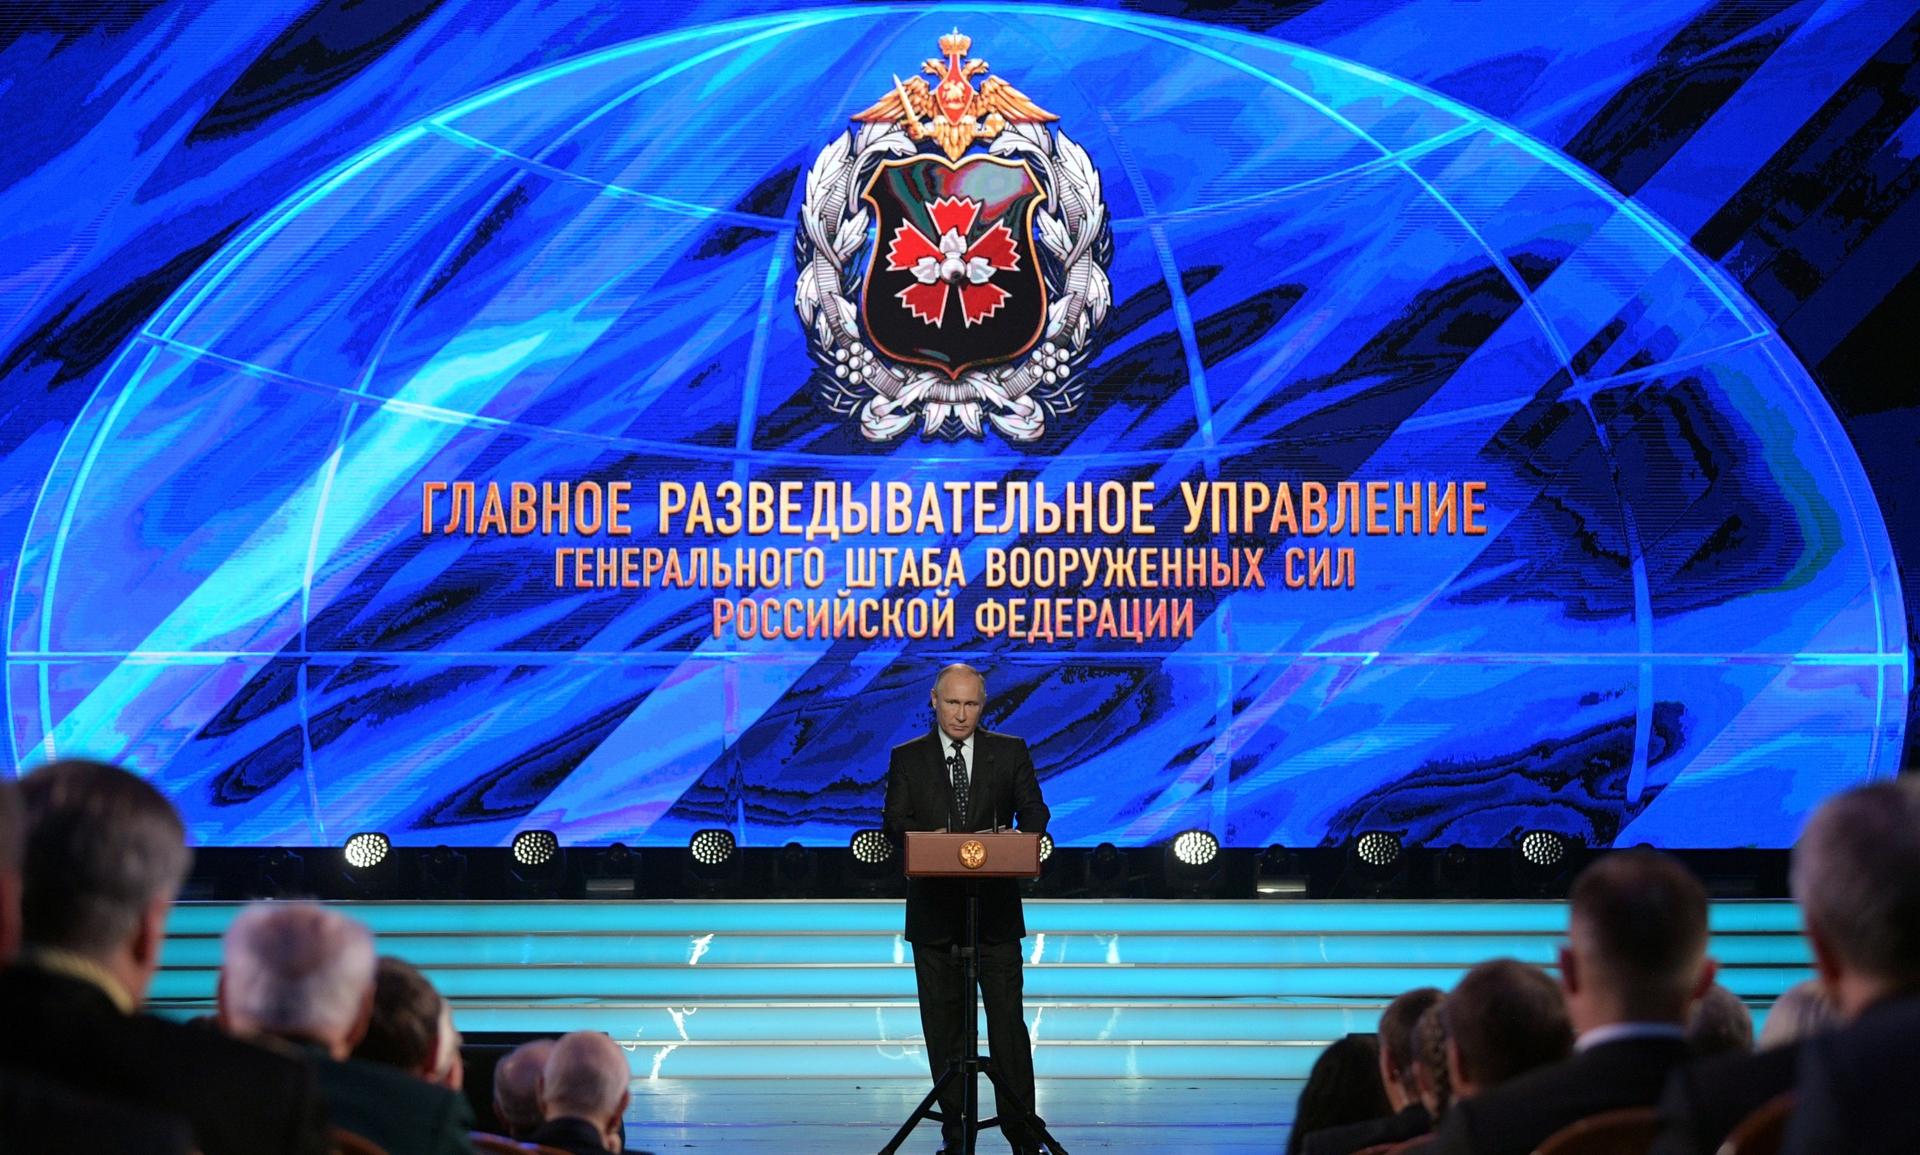 Russian President Vladimir Putin delivers a speech during the event marking the 100th anniversary of the Main Directorate of the General Staff of Russian Armed Forces, formerly known as the Main Intelligence Directorate (GRU), in Mosco